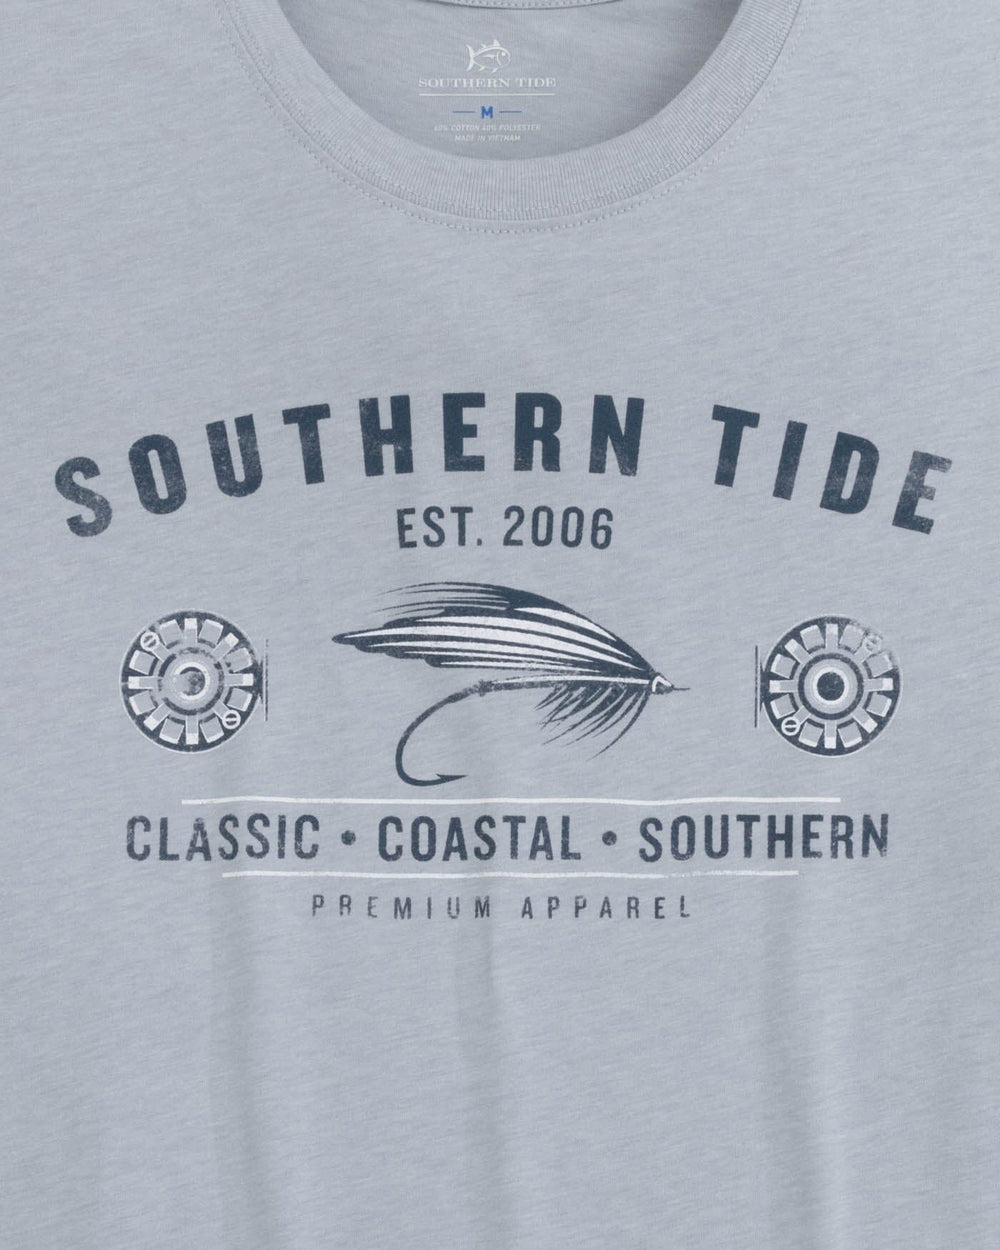 Southern Tide Heather Reel Fly Premium Apparel Short Sleeve T-Shirt - S